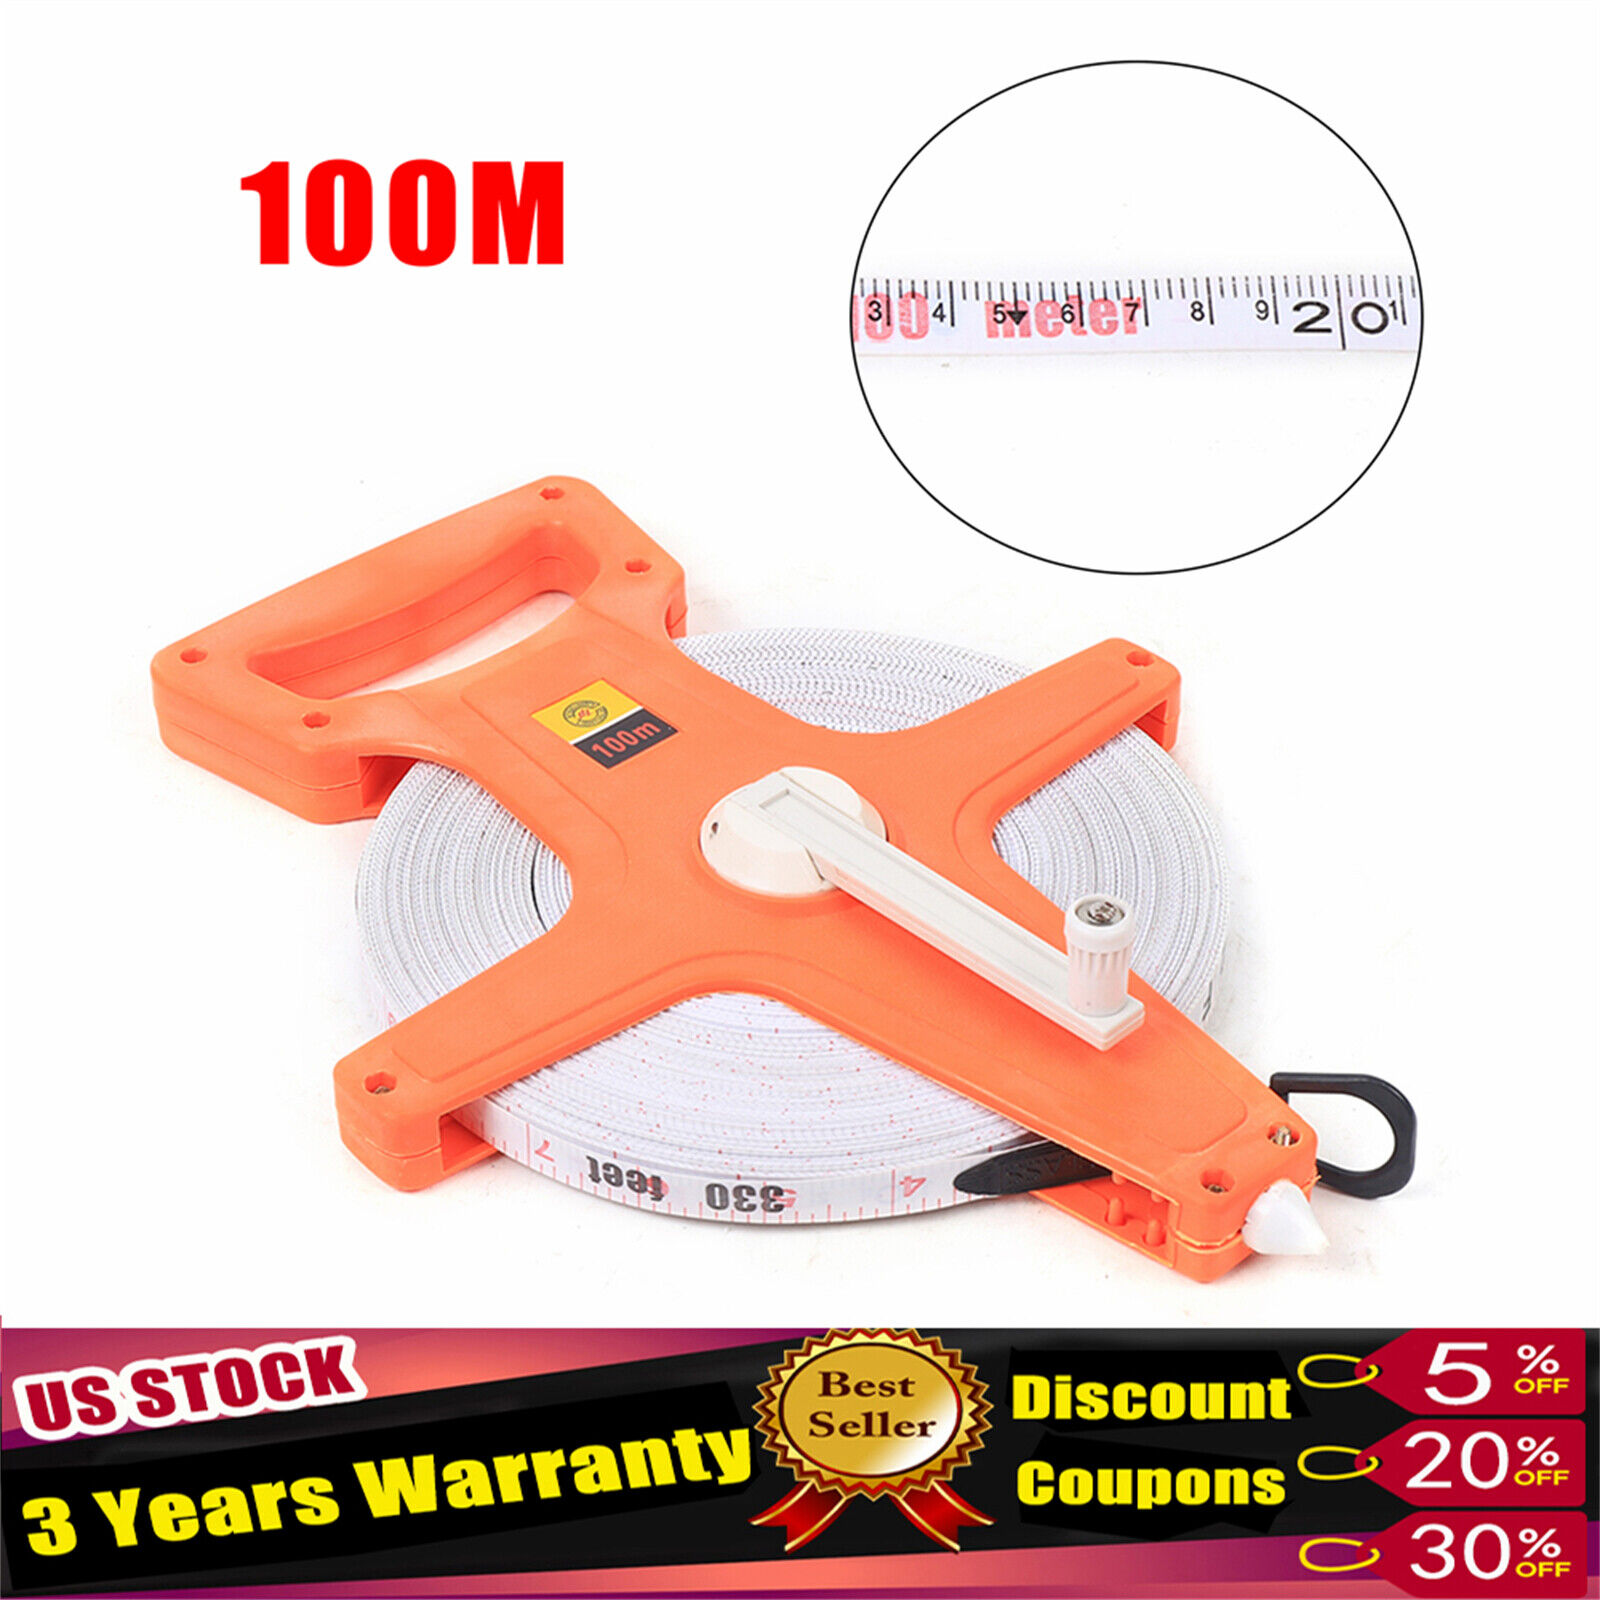 300 Foot Double Sided Fiberglass Long Tape Measure  Landscaping Surveying Tool